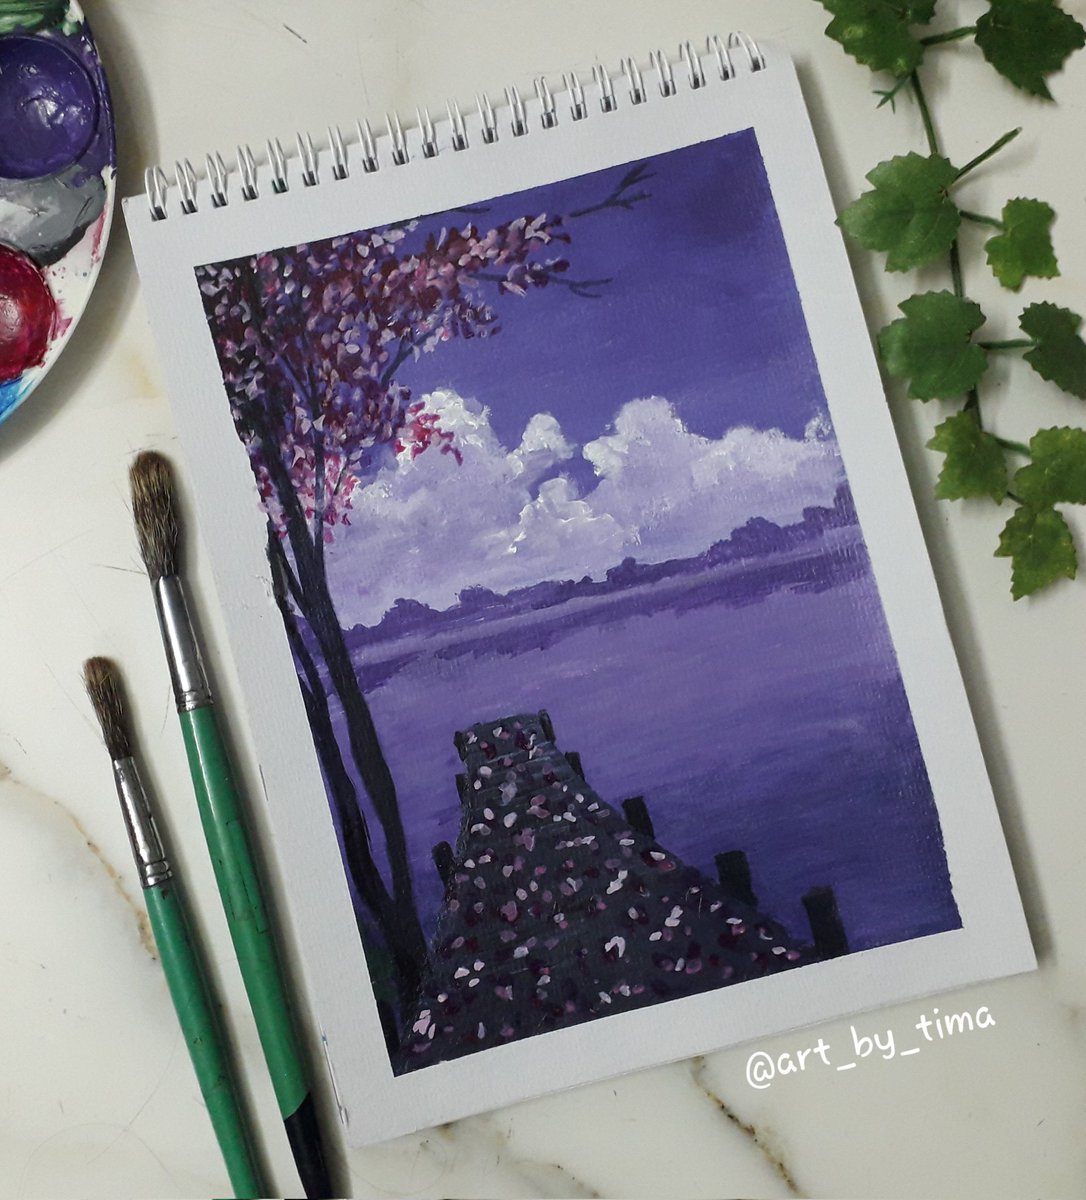 Purple cloudy sky. This is truly self through artwork. 💜💜

#blue #blueaesthetic #nightsky #nightskypainting #nightskypaintings #nightskyaesthetic #purple #purpleaesthetic #purpleaesthetics #aesthetic #aestheticpainting #aestheticpaintings #sunsetpainting #minicanvas